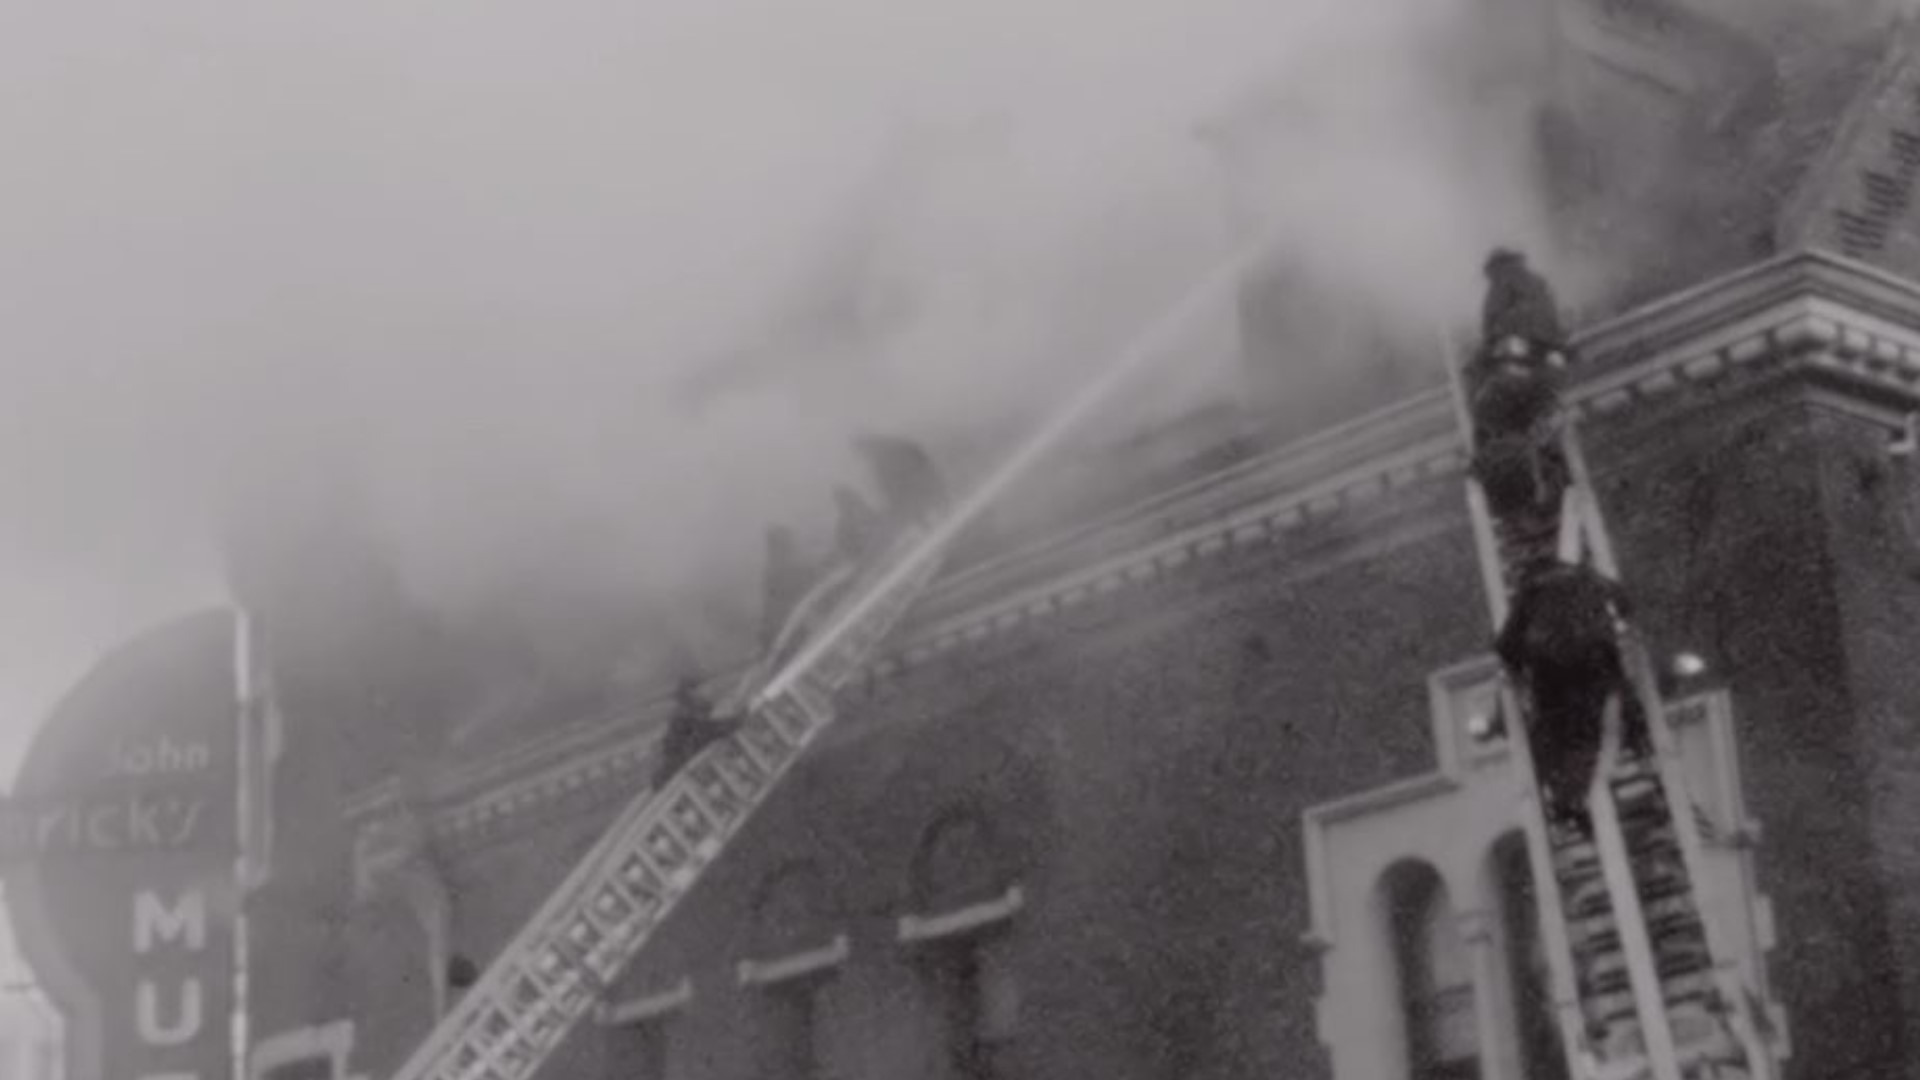 Local director edits together film about fire that forever changed his hometown